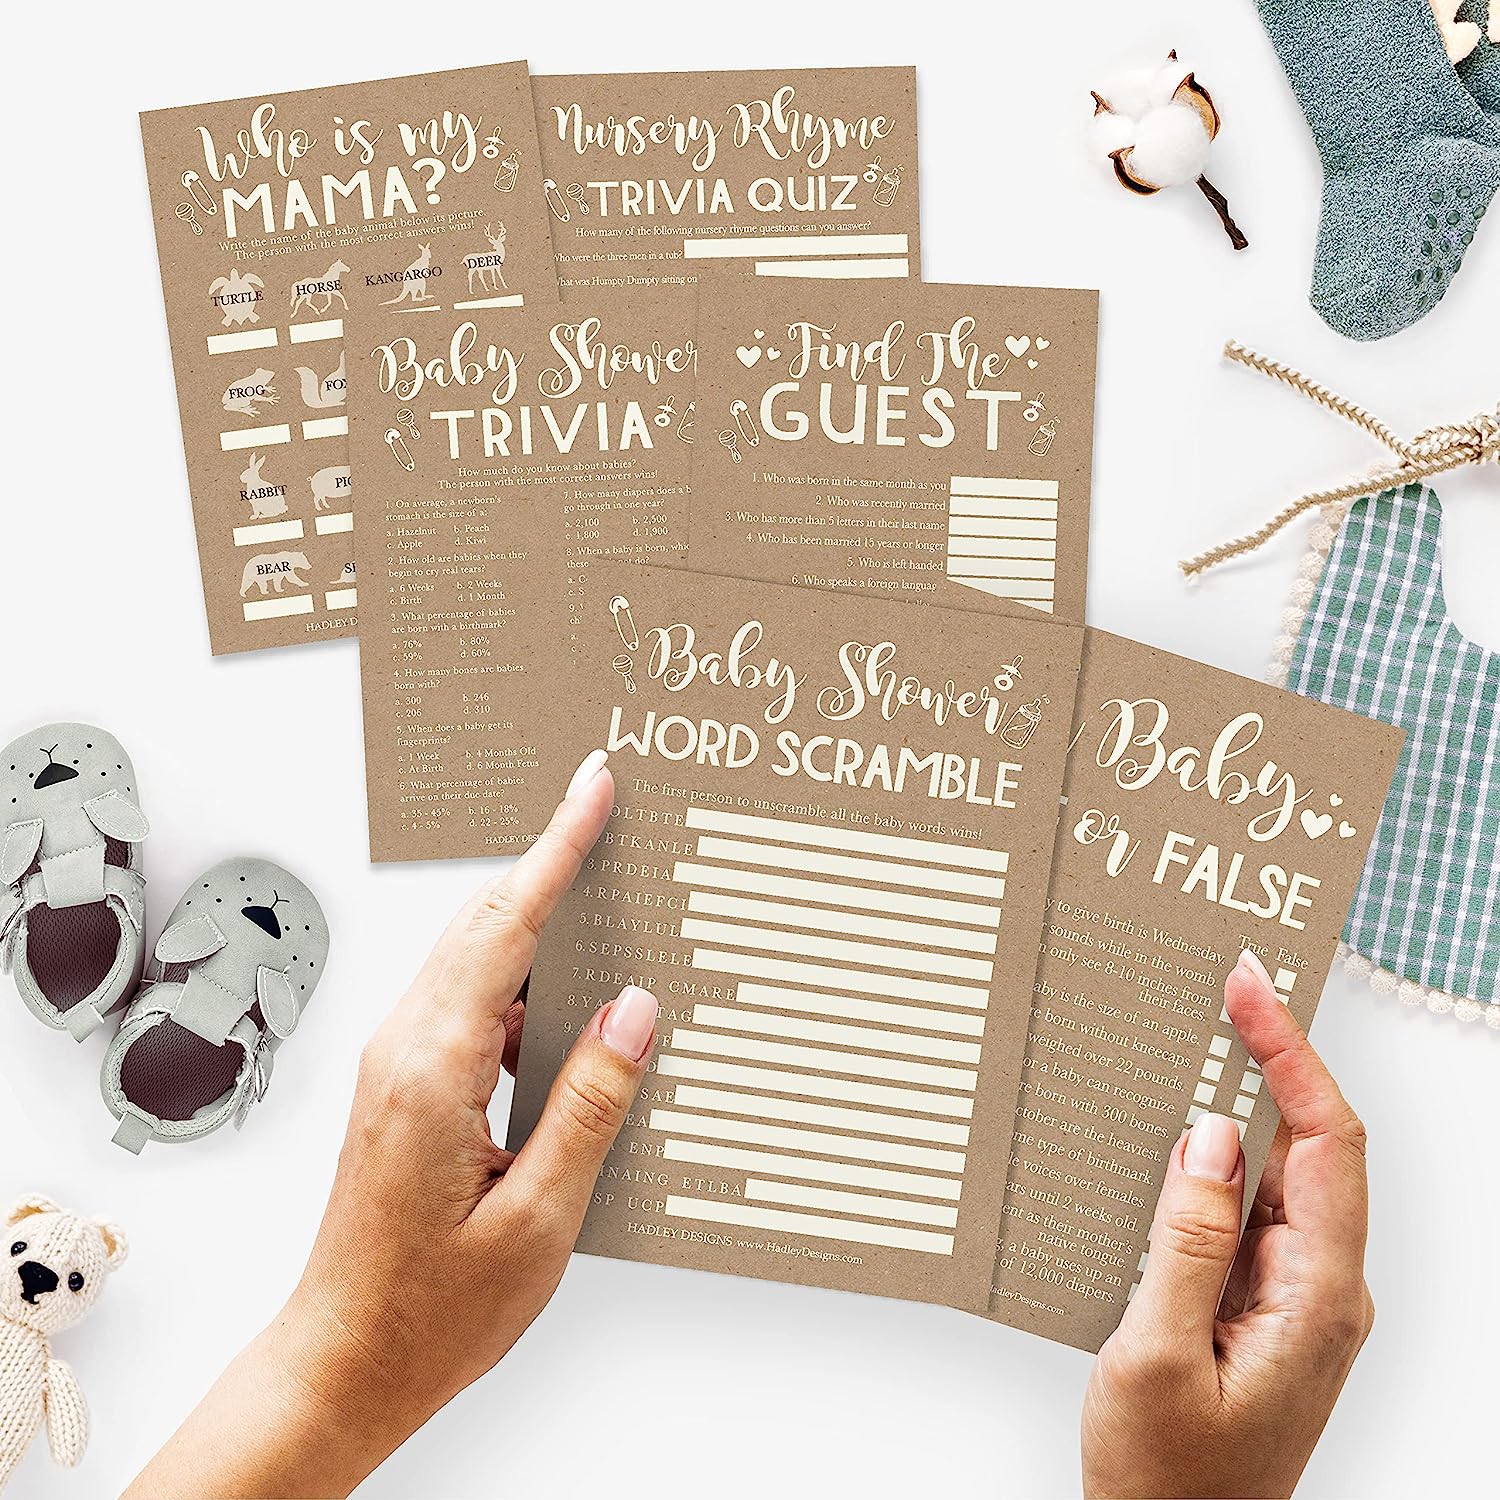 25 Rustic Word Scramble For Baby Shower, 25 True Or False Game, 25 Trivia Game, 25 Find The Guest, 25 Baby Animal Matching, 25 Nursery Rhyme Game - 6 Double Sided Cards Baby Shower Ideas